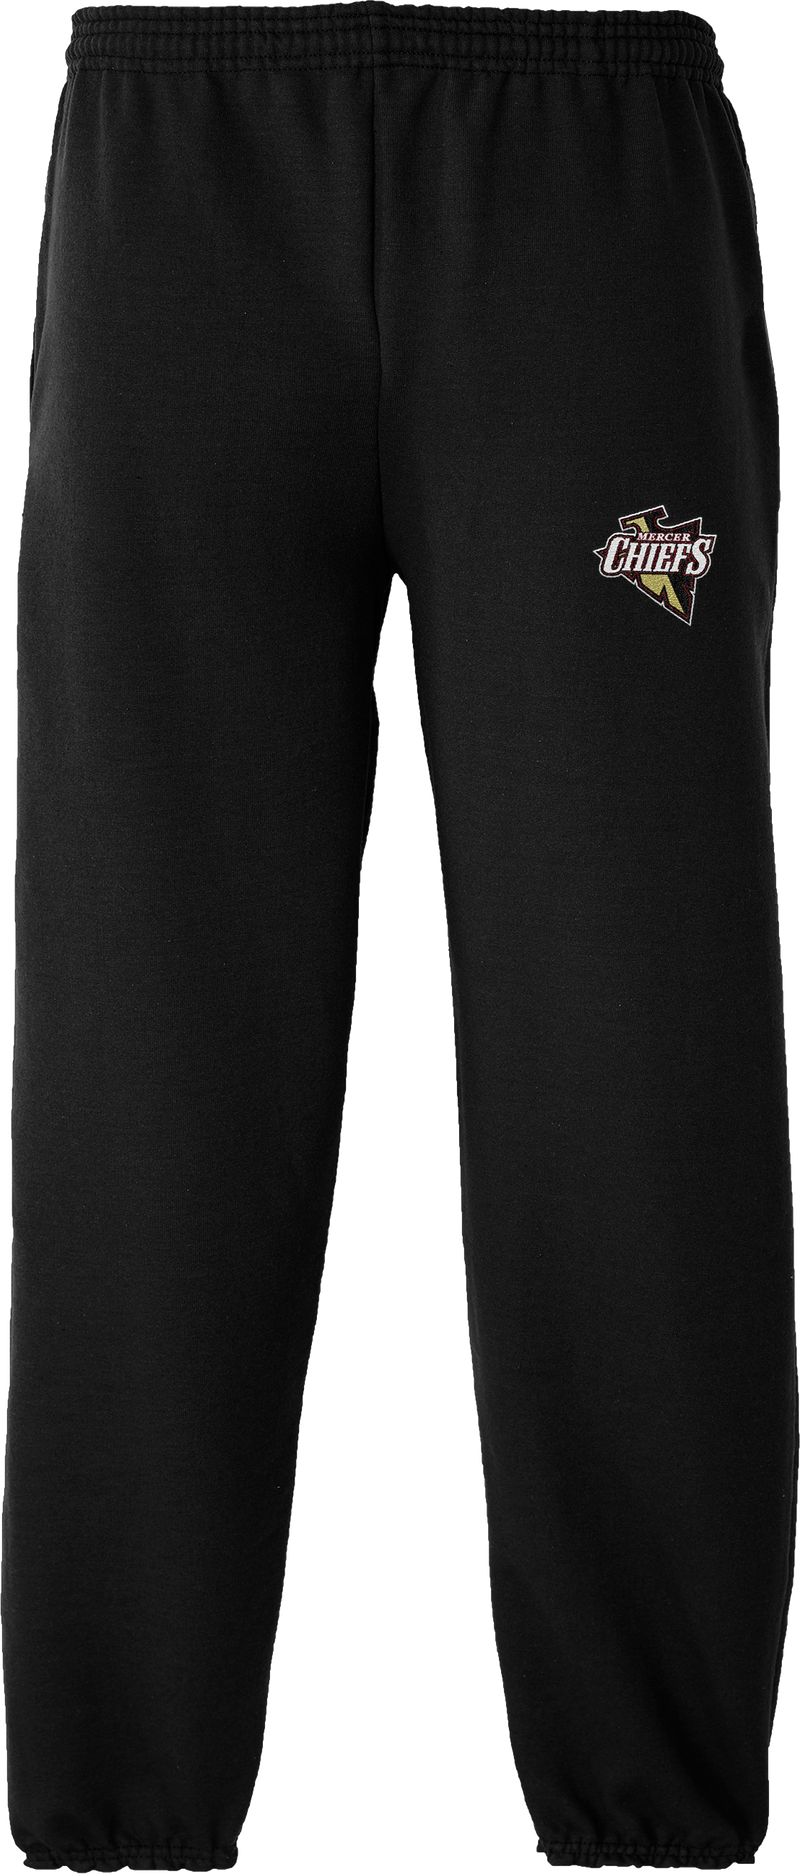 Mercer Chiefs Essential Fleece Sweatpant with Pockets